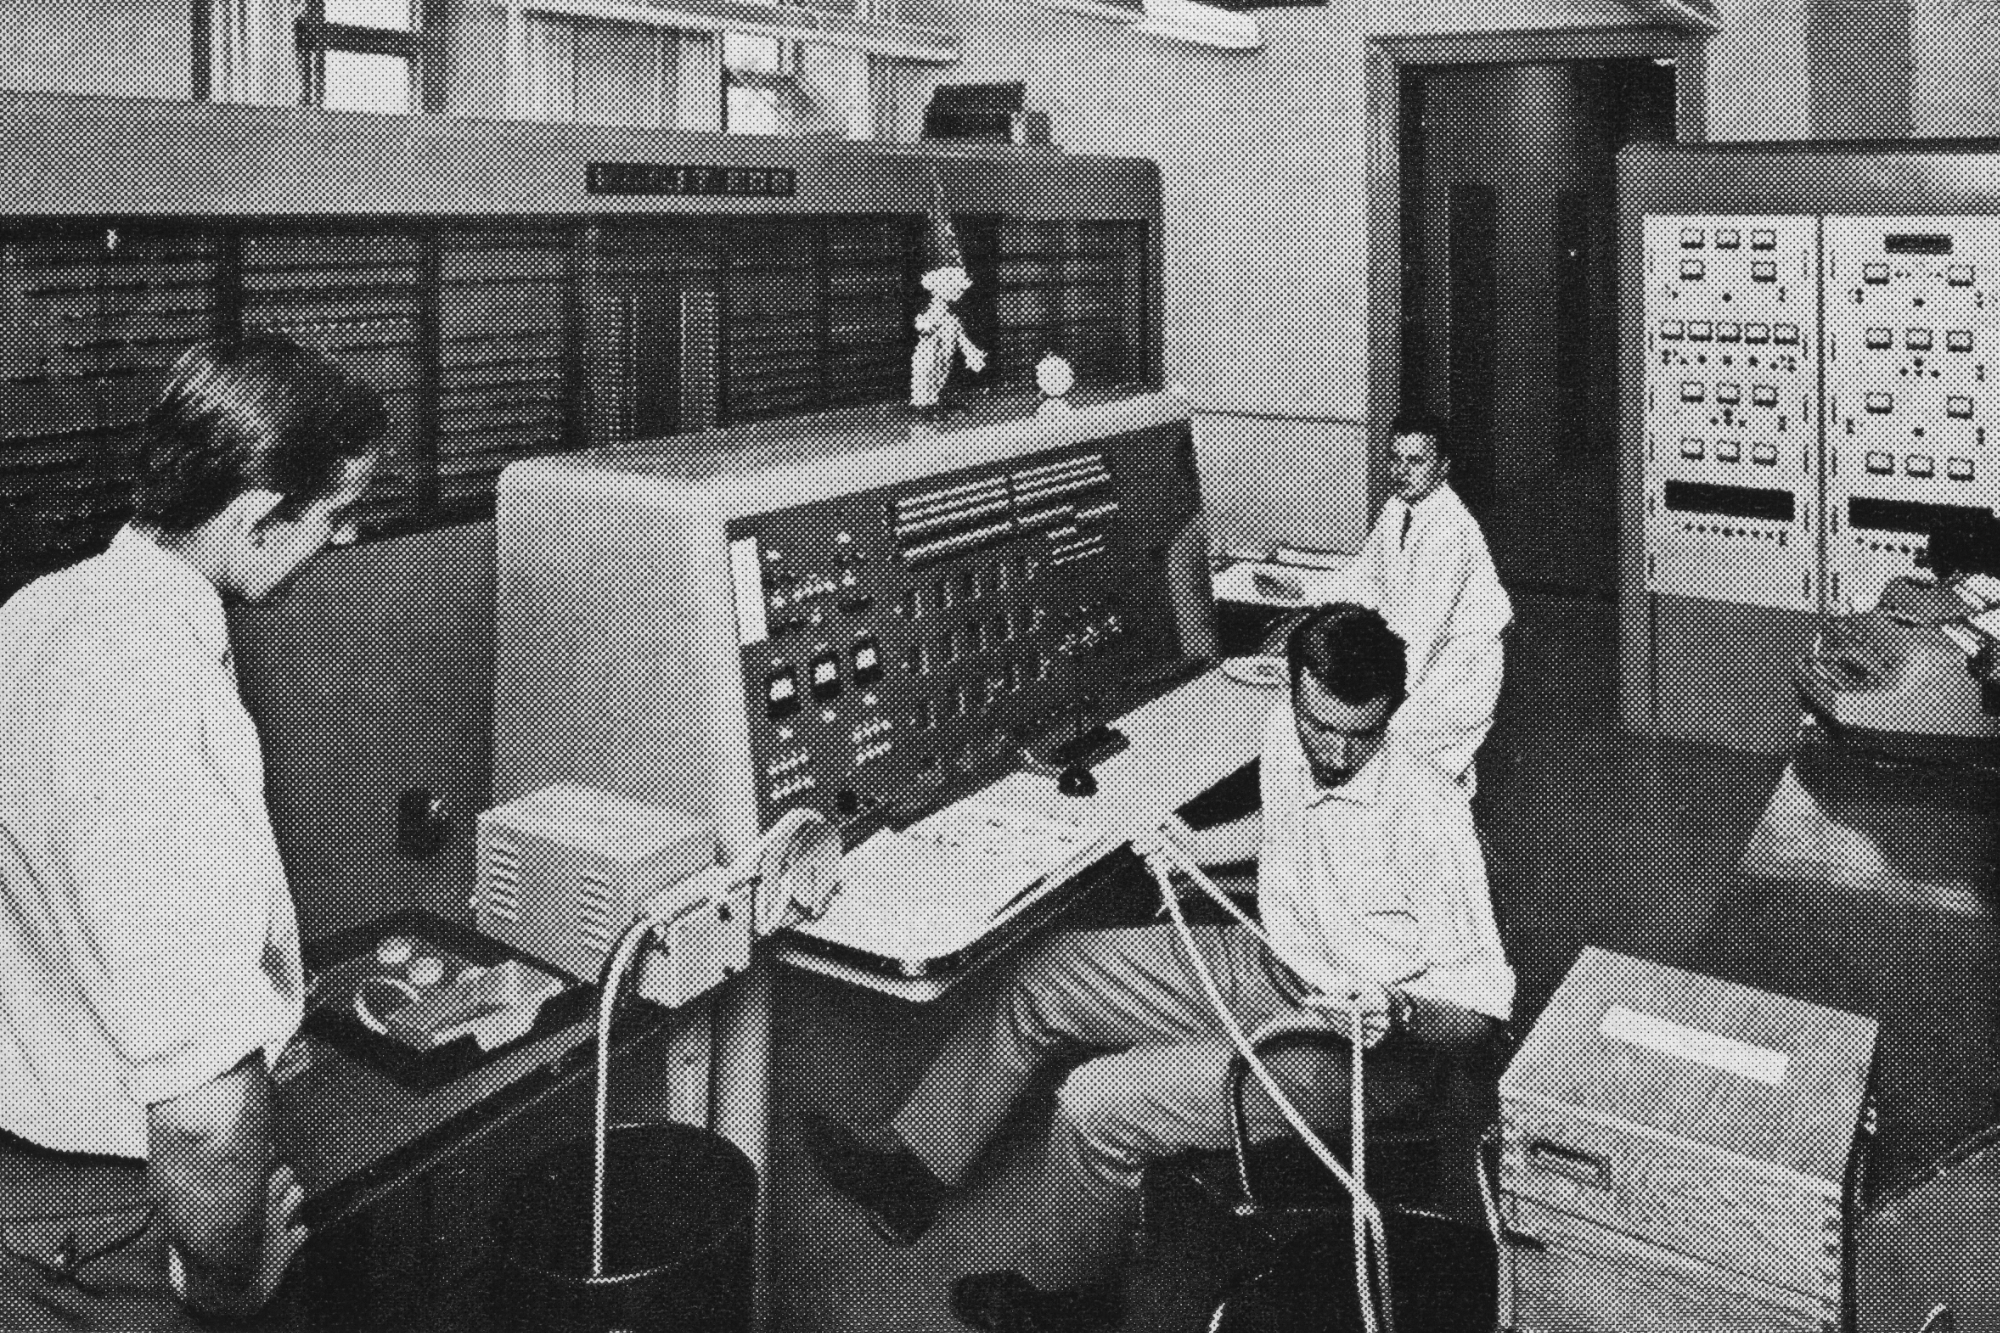 A massive mainframe computer and console